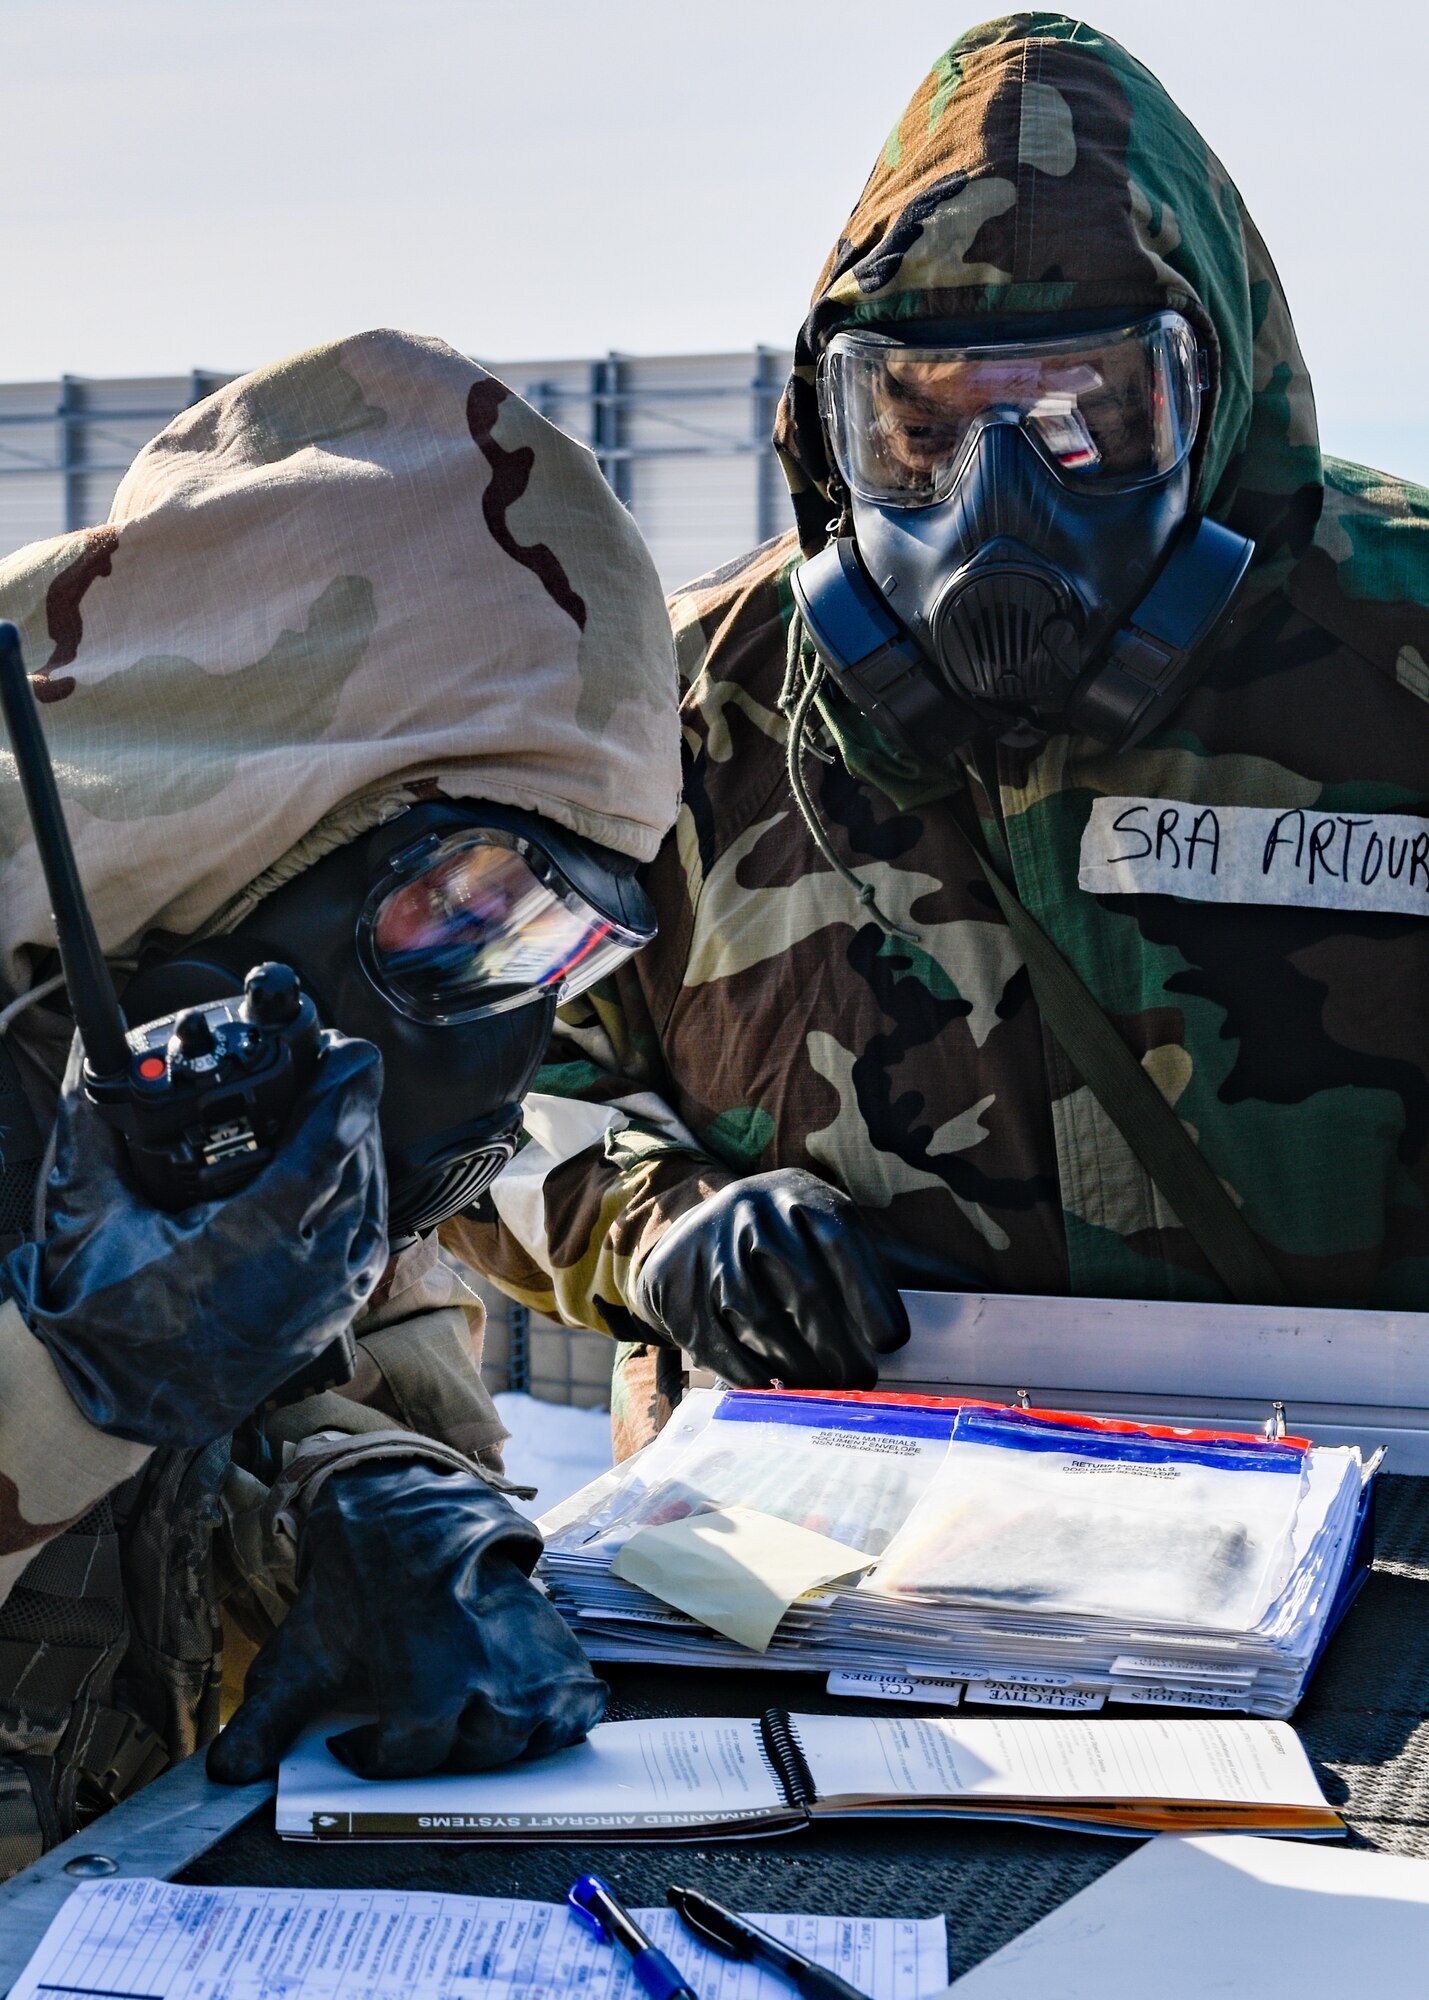 The 910th Civil Engineer Squadron’s emergency management flight conducted a chemical, biological, radiological, nuclear and high-yield explosives response training event on March 14, 2022, at Youngstown Air Reserve Station, Ohio.